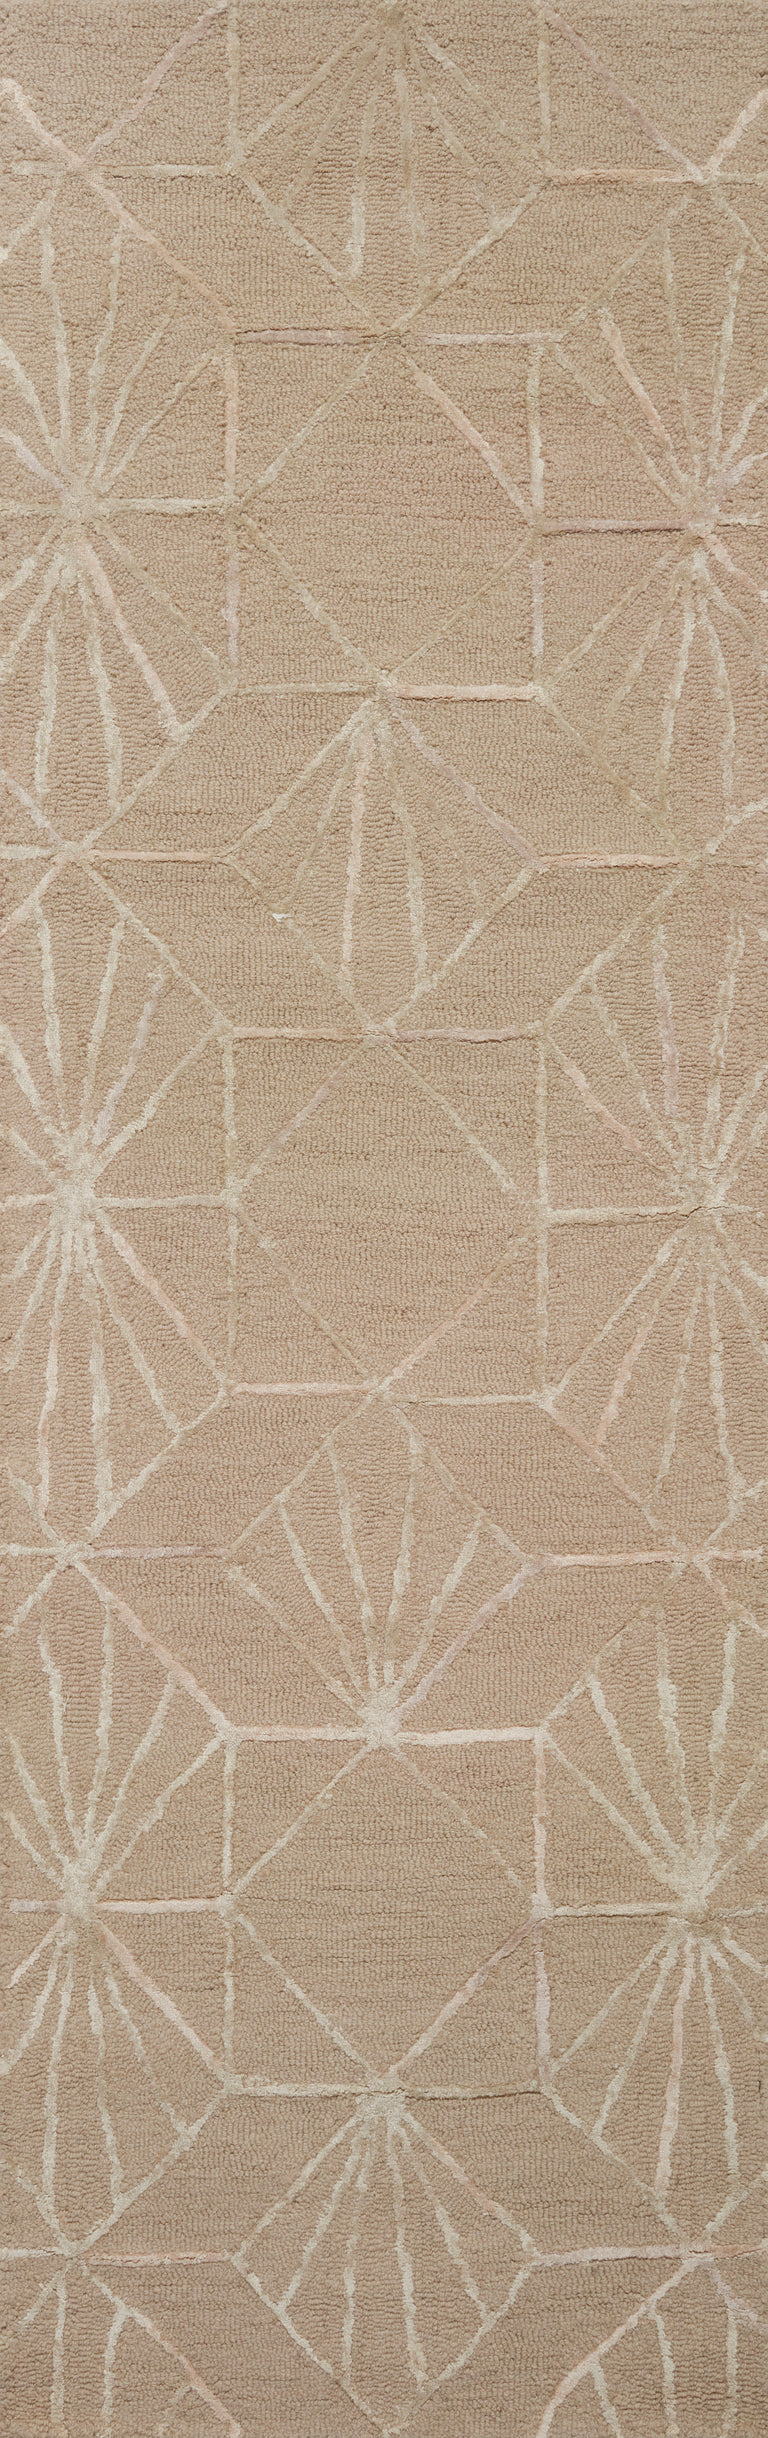 Loloi Rugs Verve Collection Rug in Sand, Blush - 9'3" x 13'